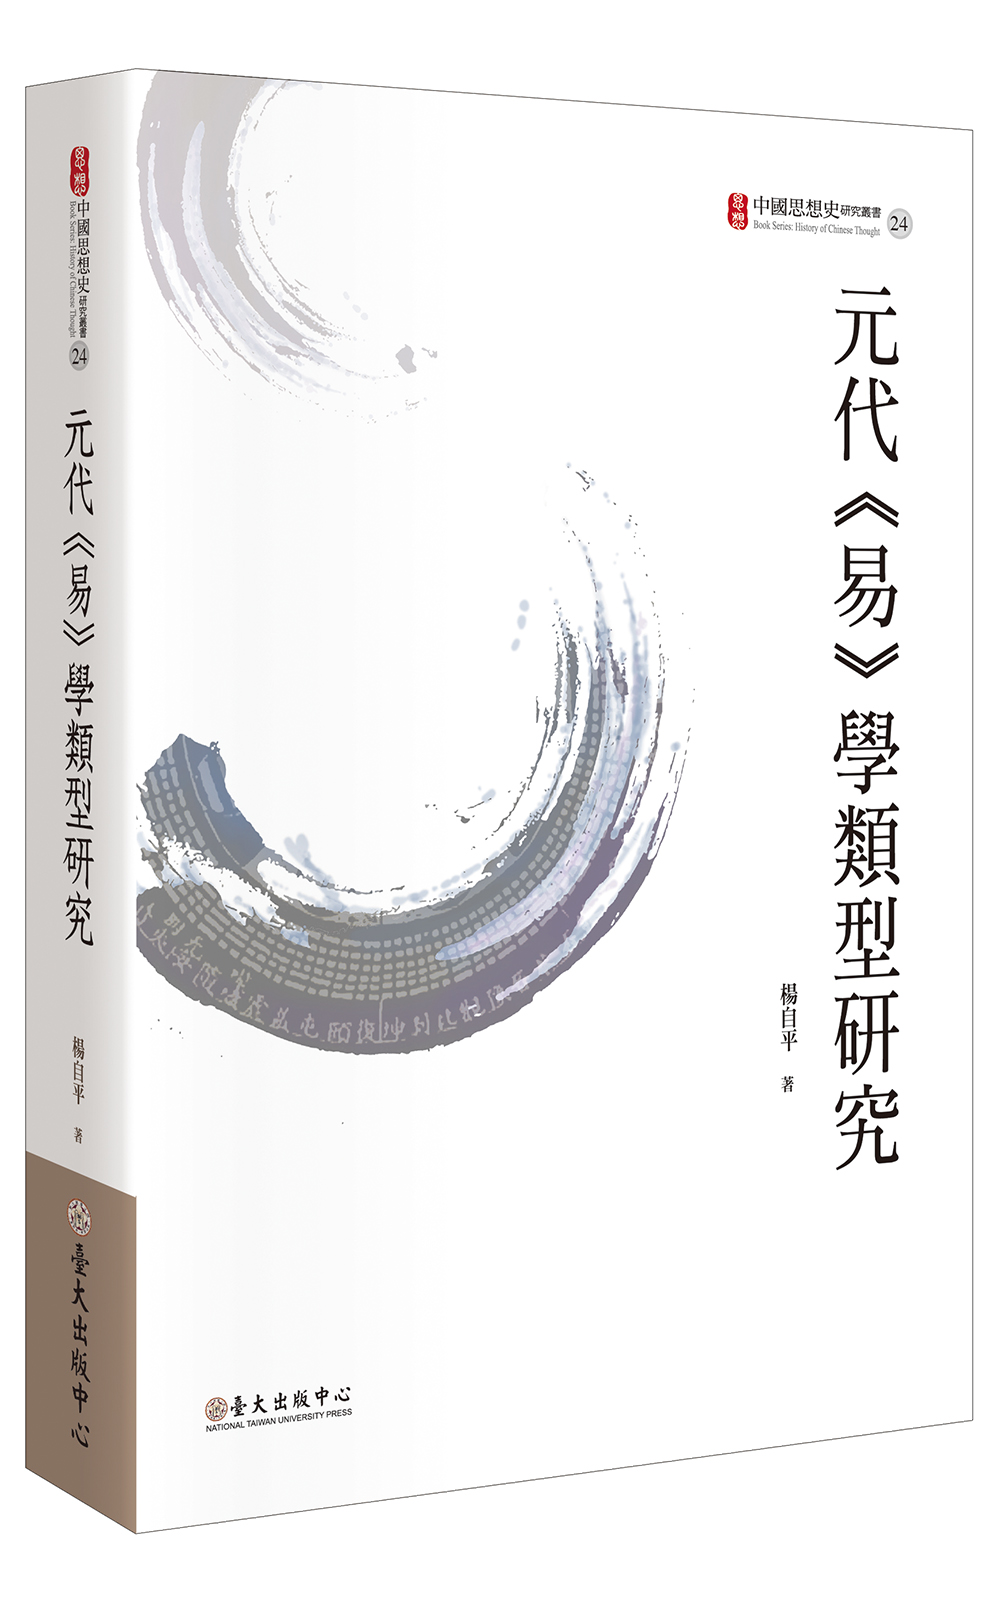 Research on the Models of  I Ching  Studies in Yuan Dynasty